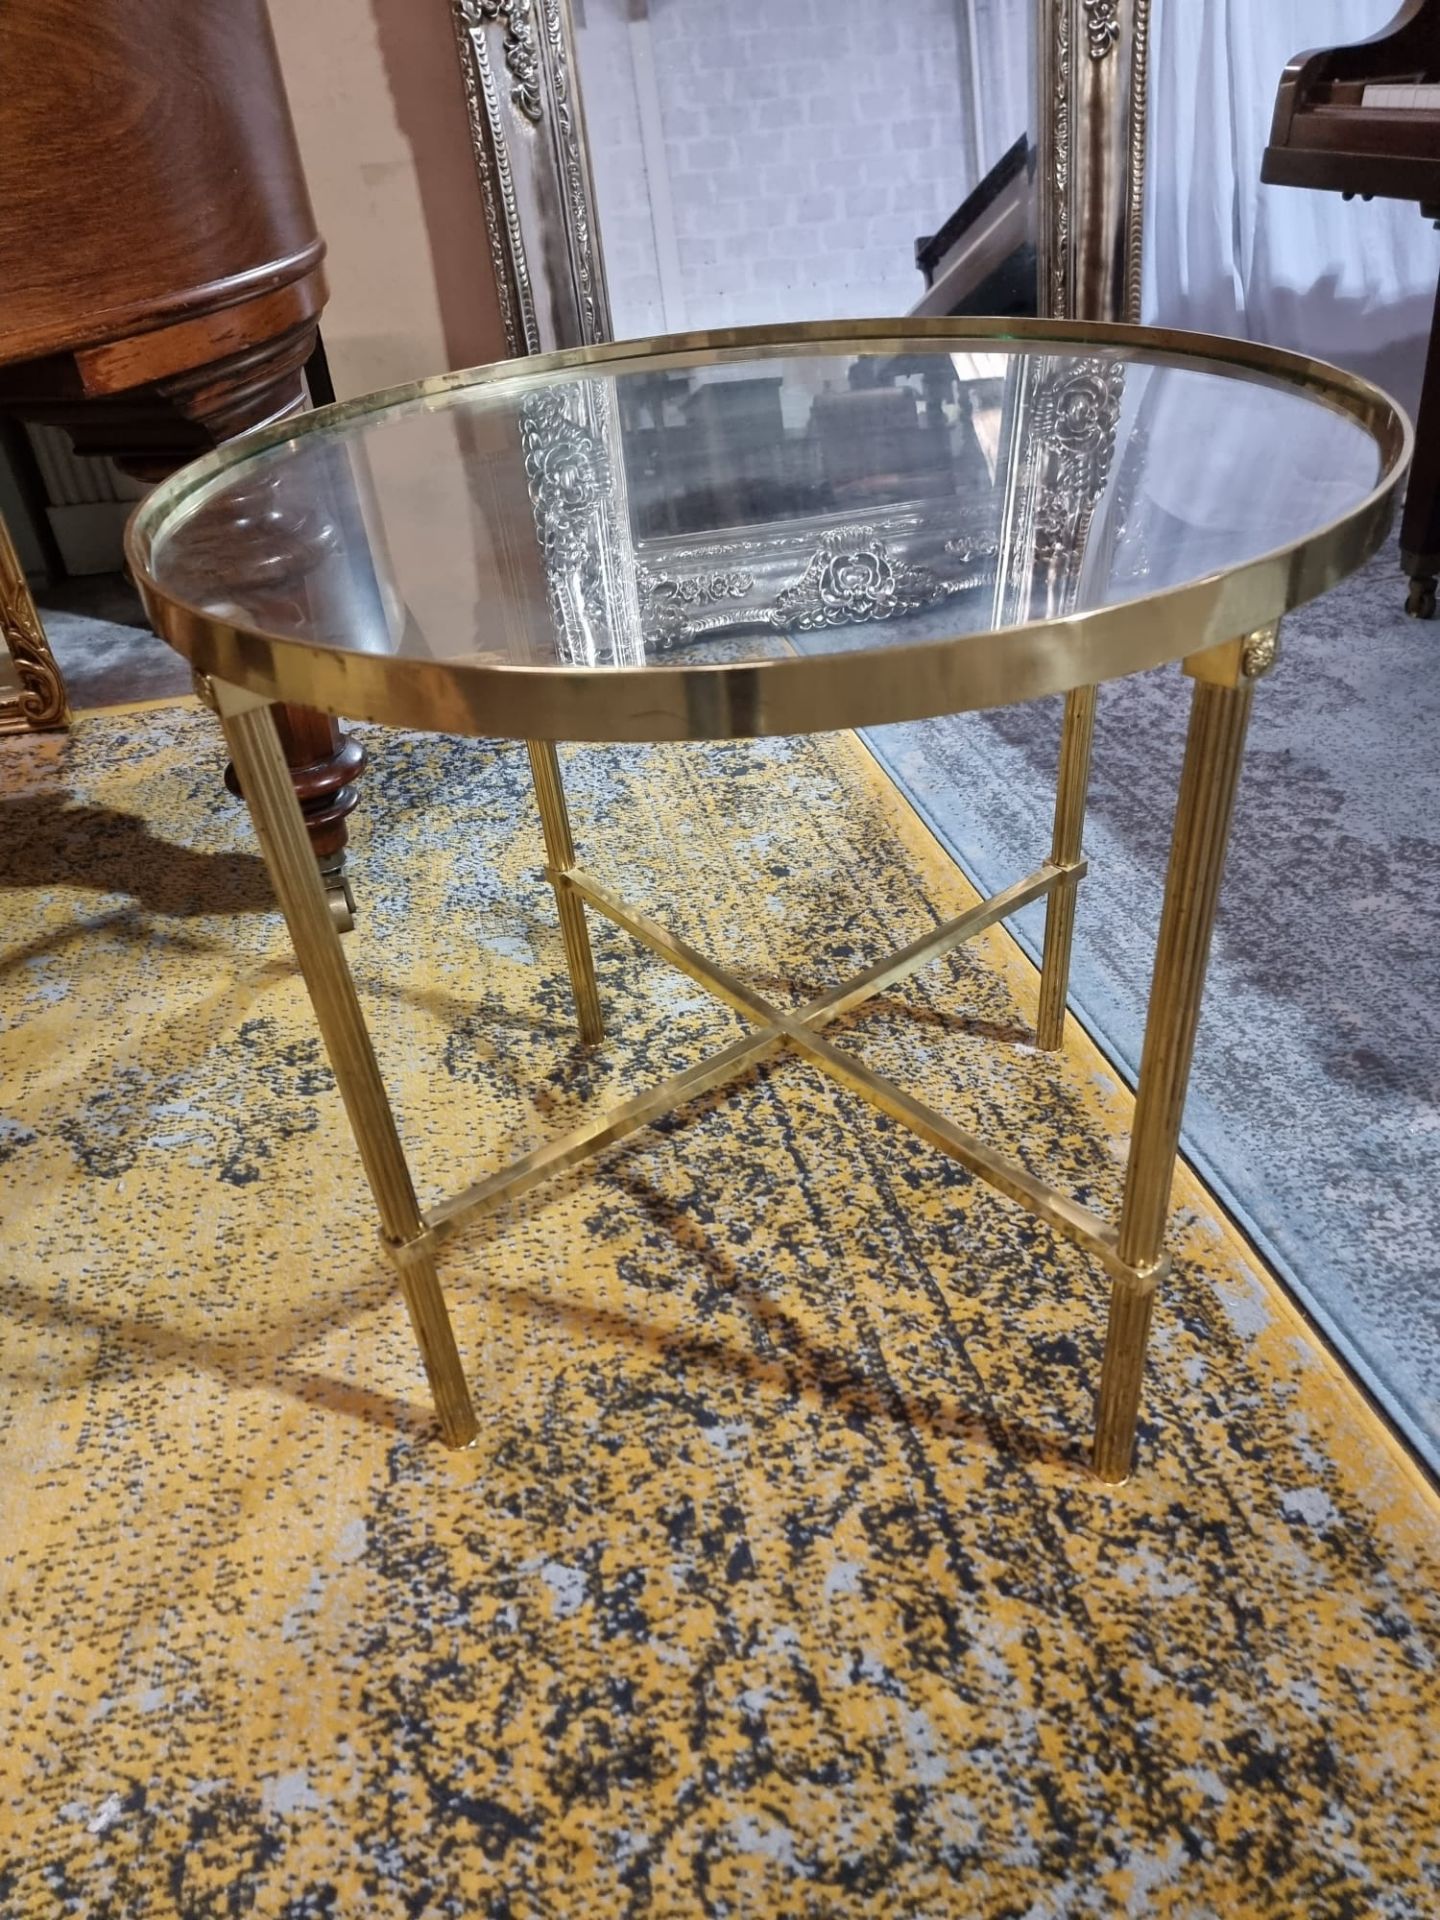 Neoclassical style Round Glass Coffee Table, Brass frame with flute reeded legs 70cm diameter x 64cm